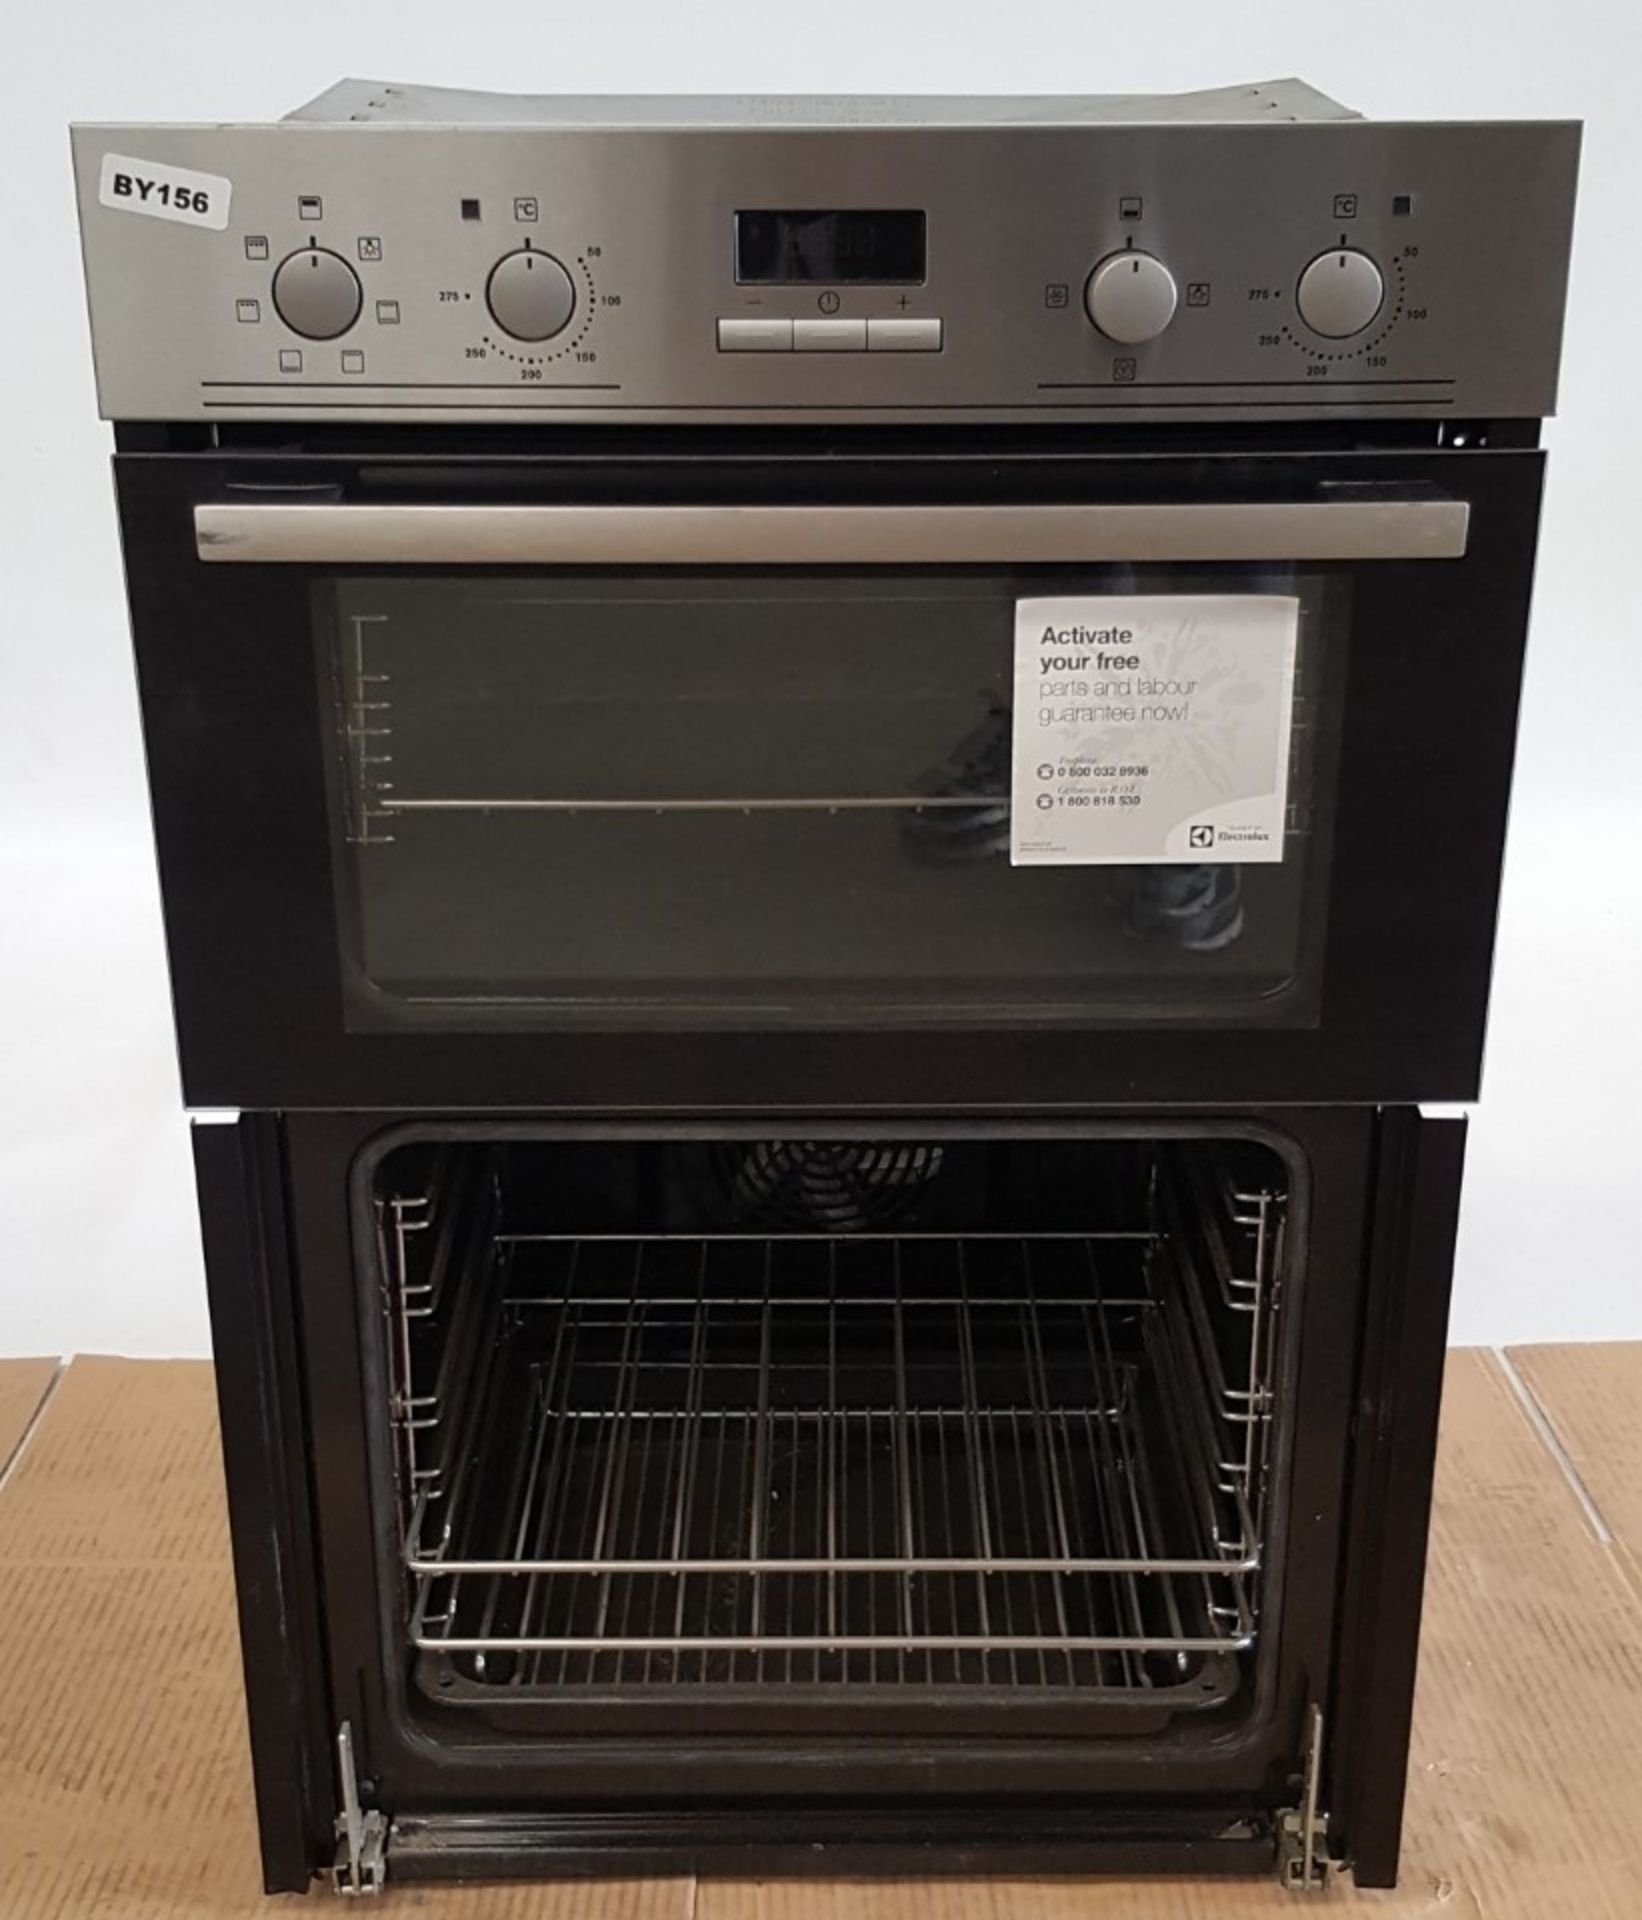 1 x Electrolux EOD3410AOX Built In Double Electric Oven Stainless Steel - Ref BY156